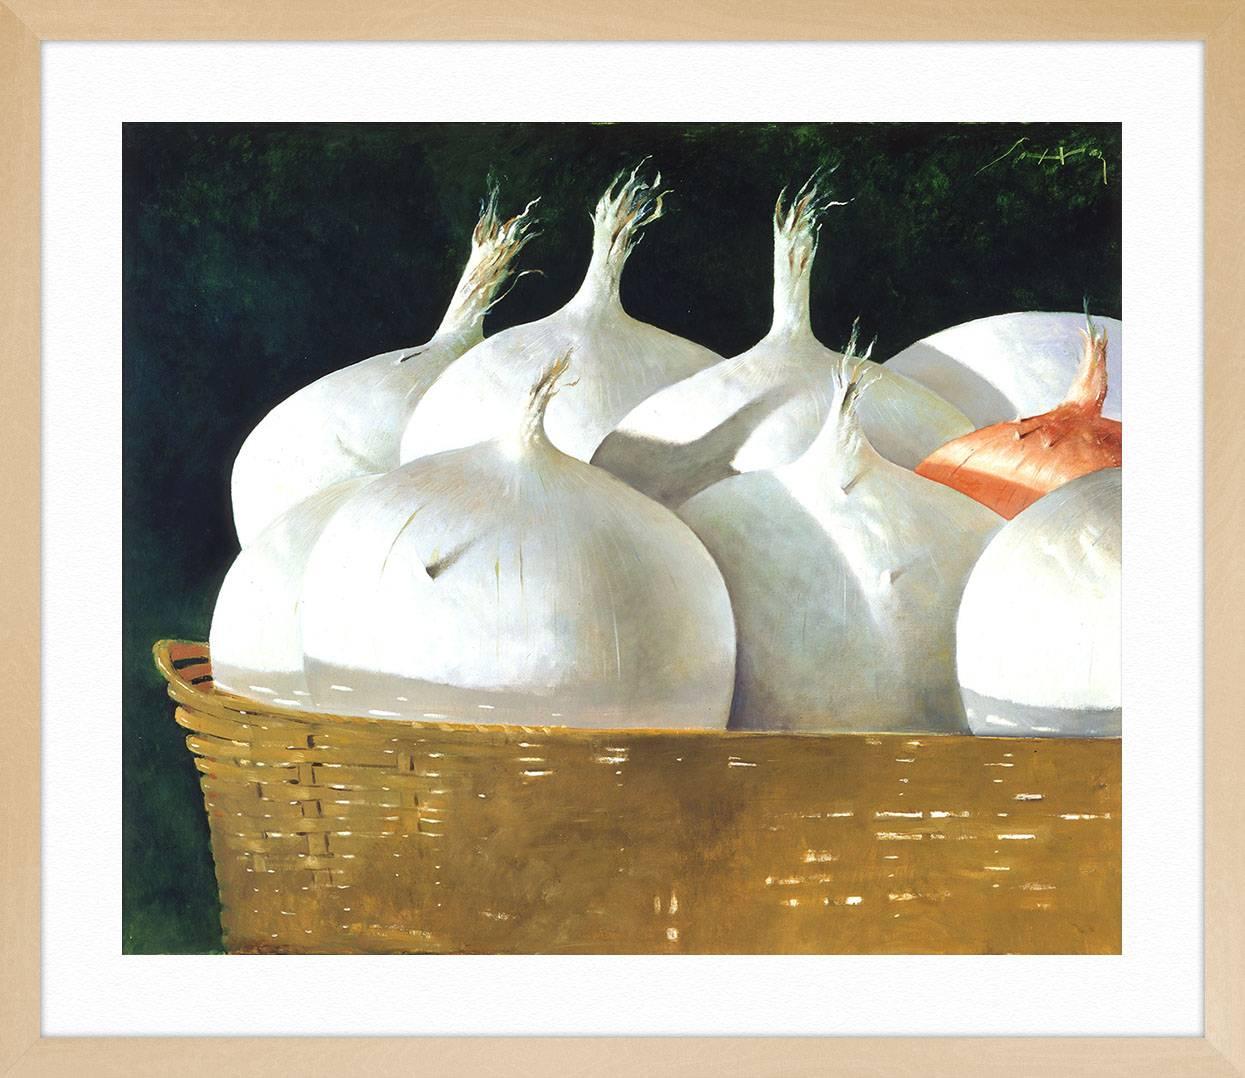 ABOUT THIS PIECE: Julio Larraz is an expert draftsman, adroitly sketching his subjects and enlivening them with vibrant color. Larraz is recognized for his precise and detailed technique, his imagination, and his subtle touch.  

ABOUT THIS ARTIST: